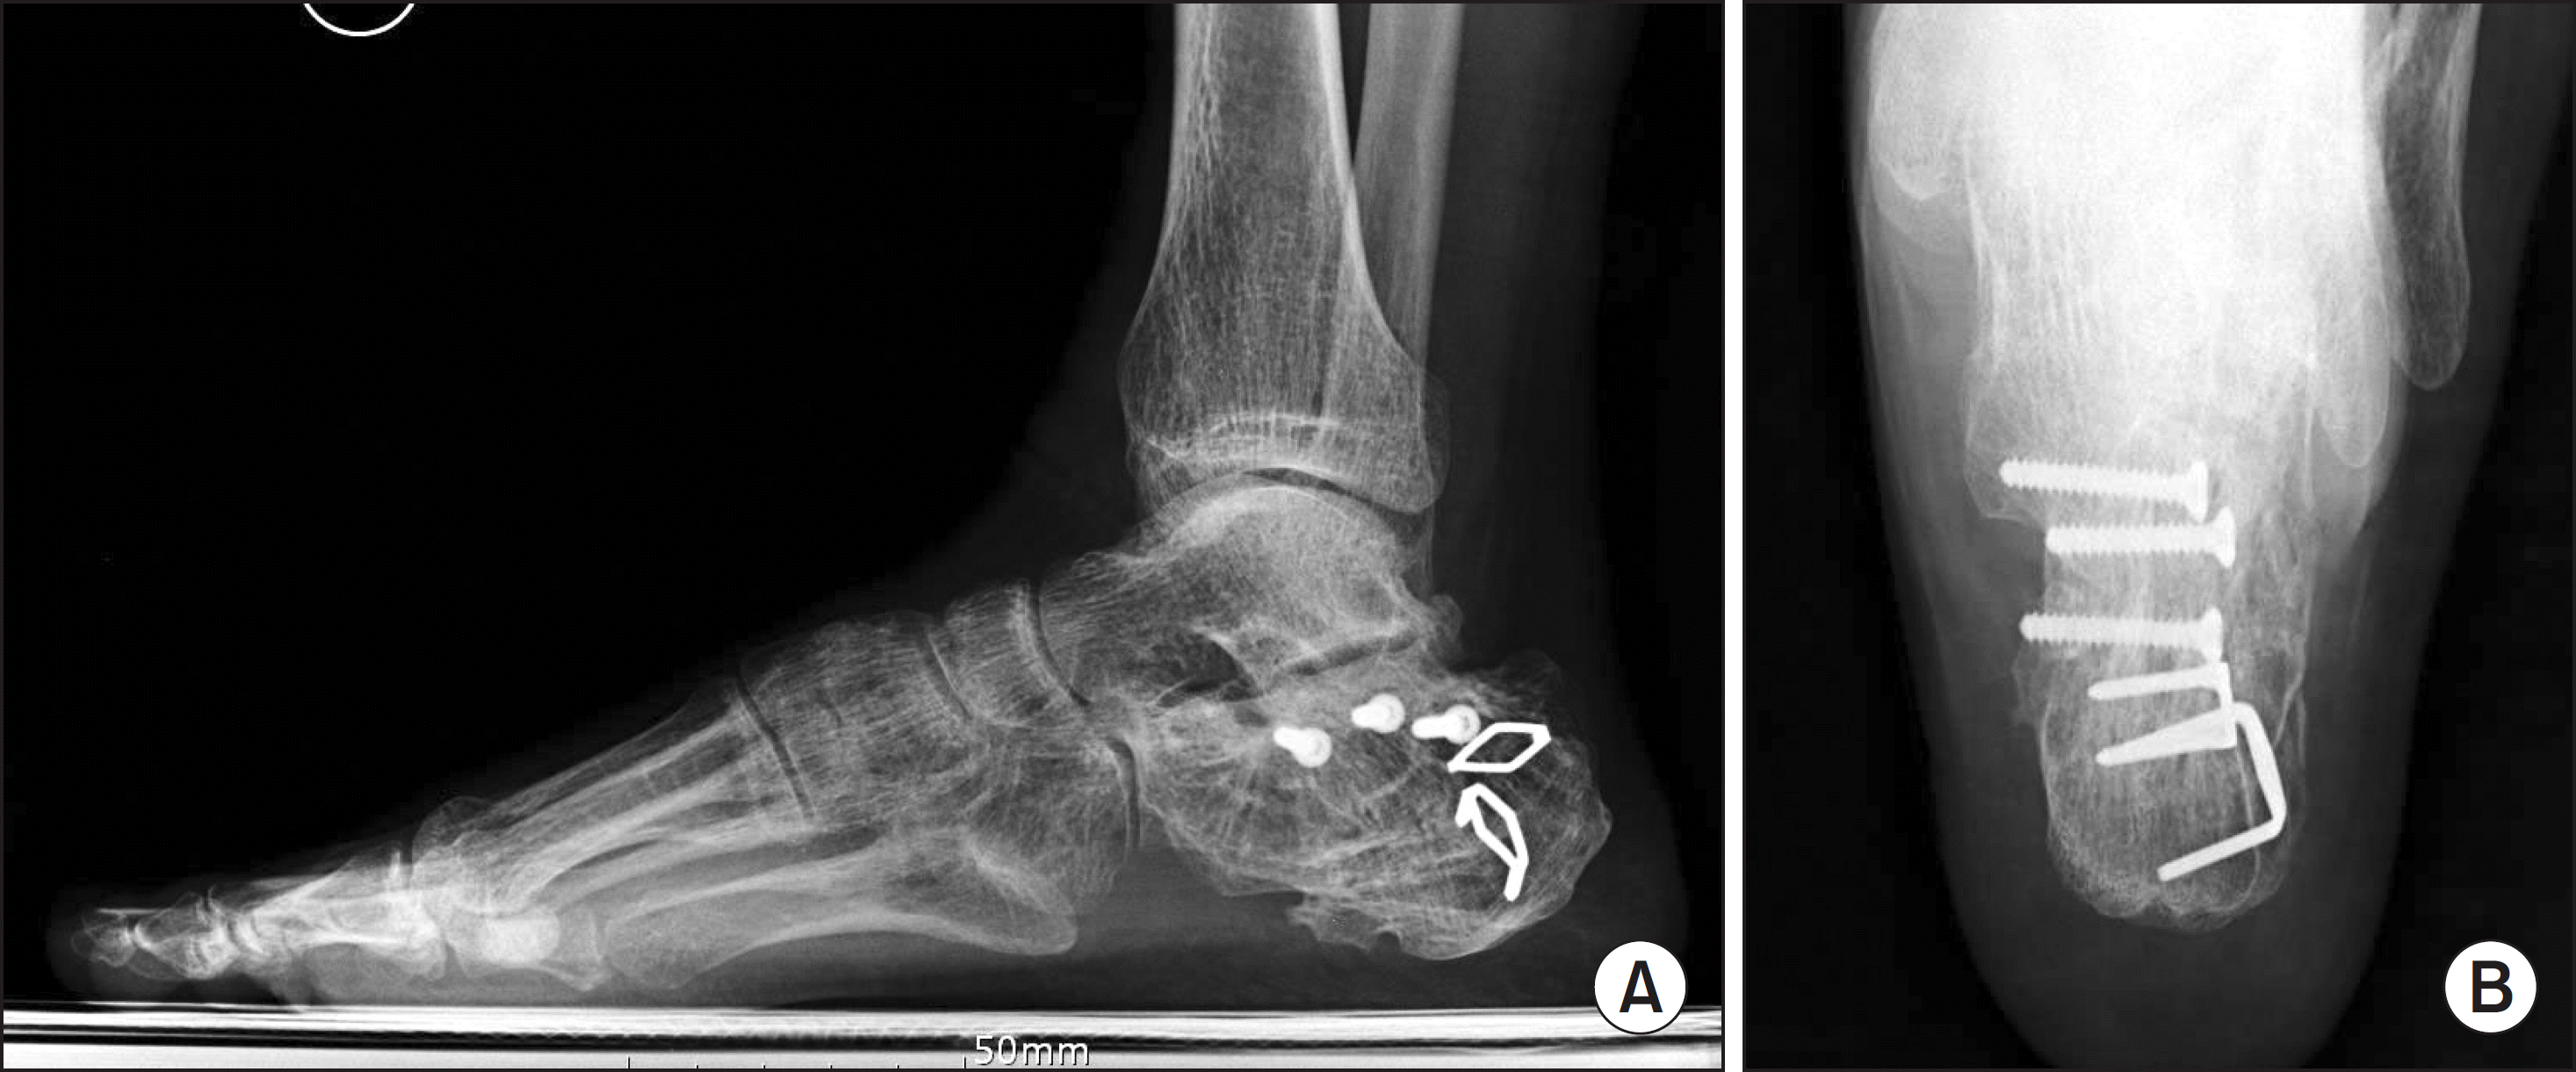 Technical Tip: A Simple Method for Proper Placement of an Intramedullary  Nail Entry Point for Tibiotalocalcaneal or Tibiocalcaneal Arthrodesis | The  Foot and Ankle Online Journal